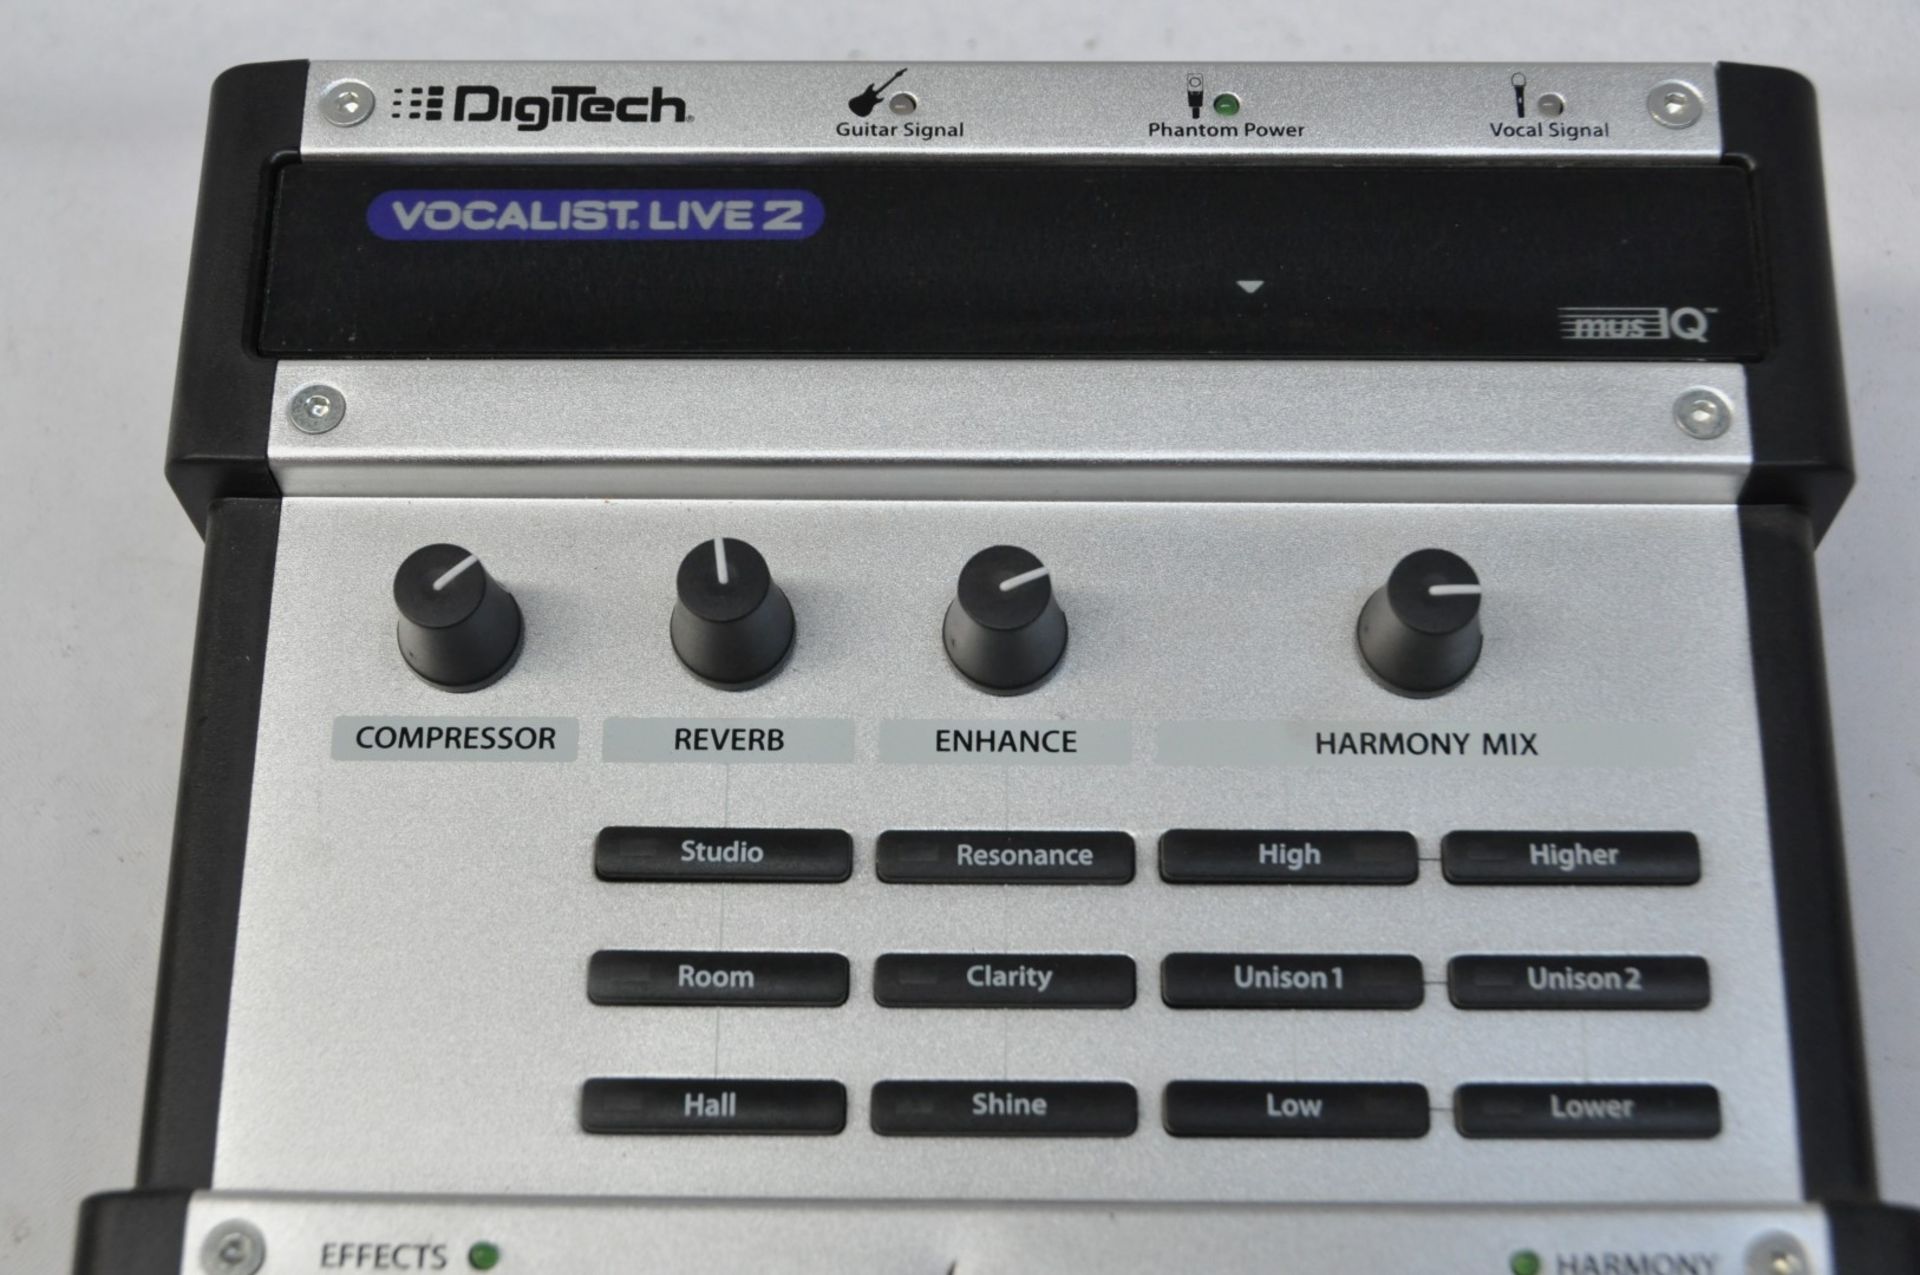 1 x Digitech Vocalist Live 2 Harmony FX Processor for Guitarists - Features Built In Guitar - Image 3 of 3